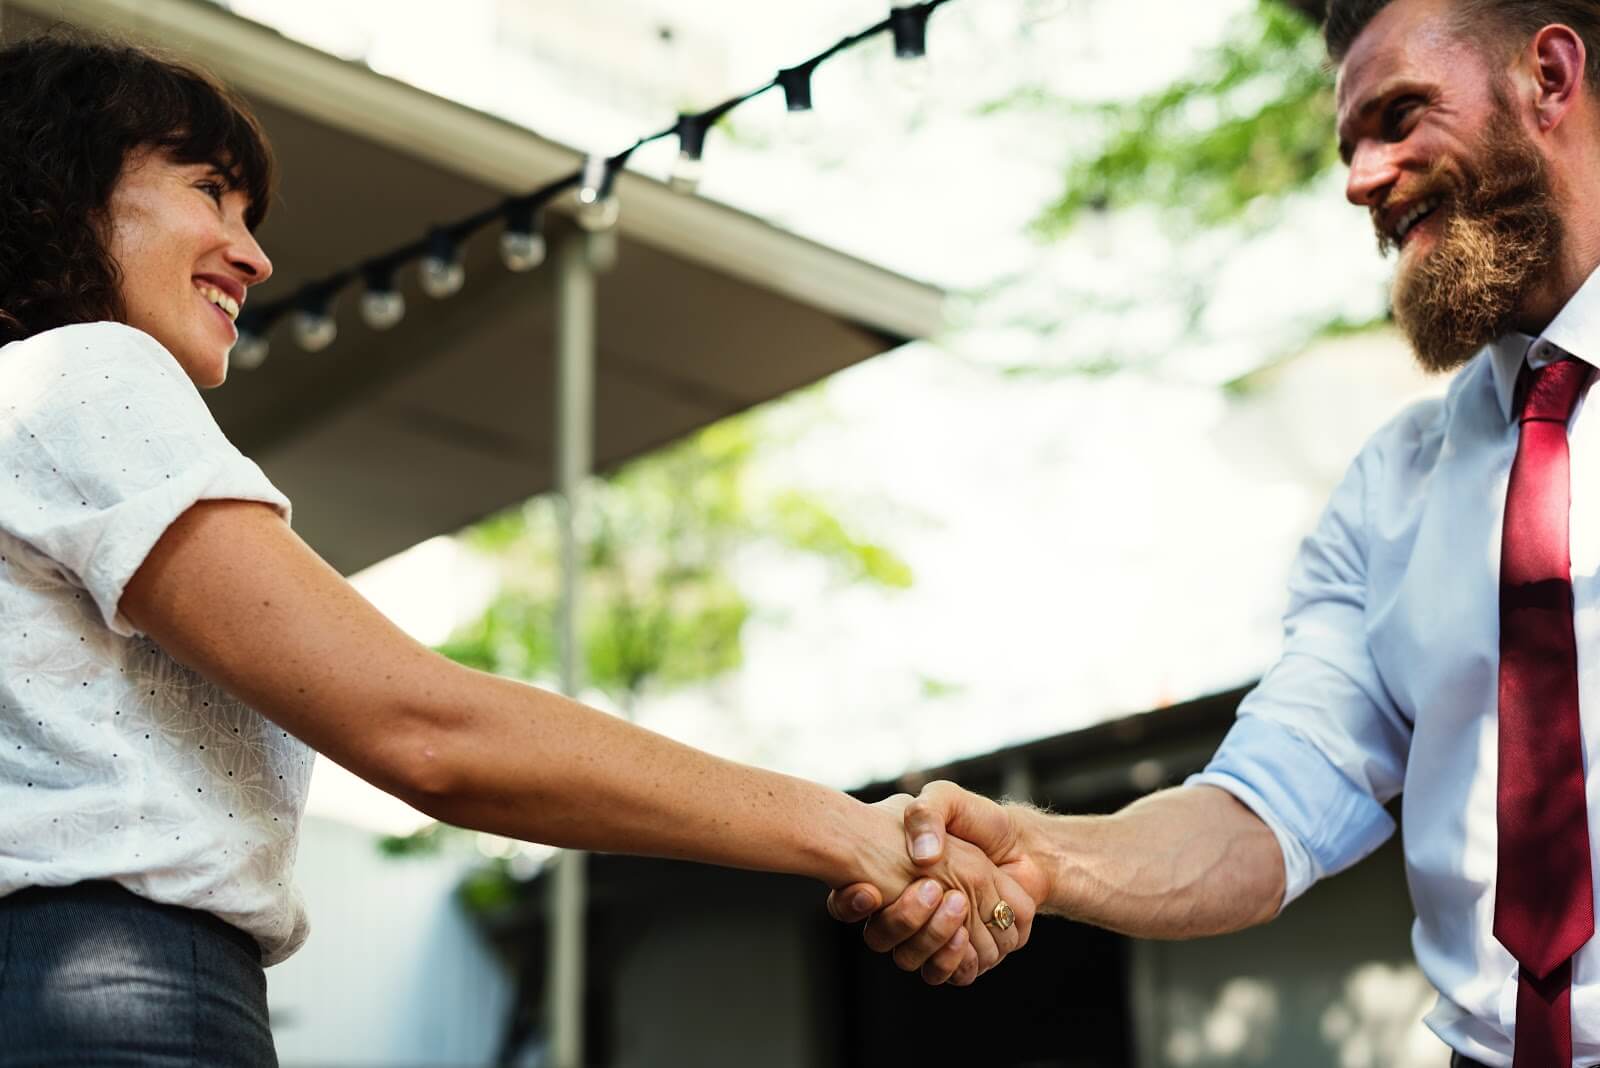 How to become a professional organizer: Two professionals shake hands